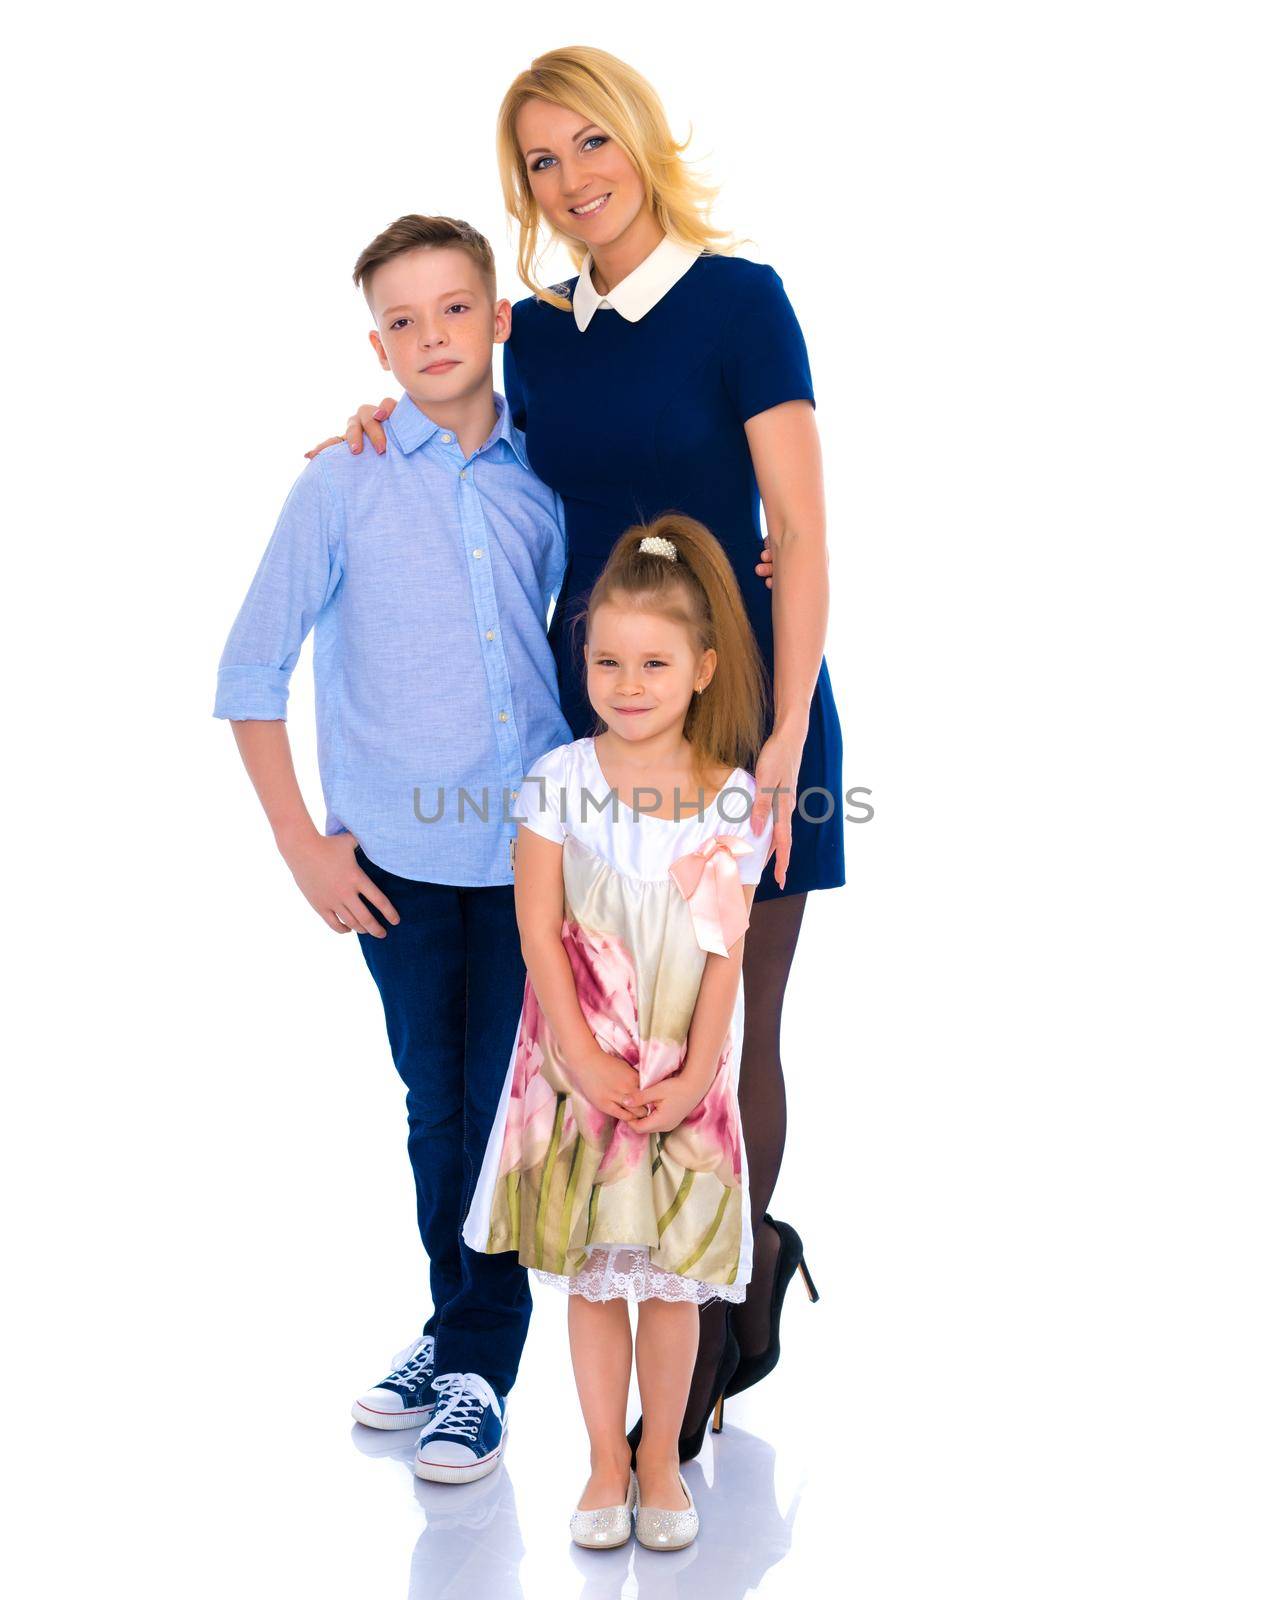 Happy family mom and two children hold hands. The concept of family values, the upbringing of children. Isolated on white background.